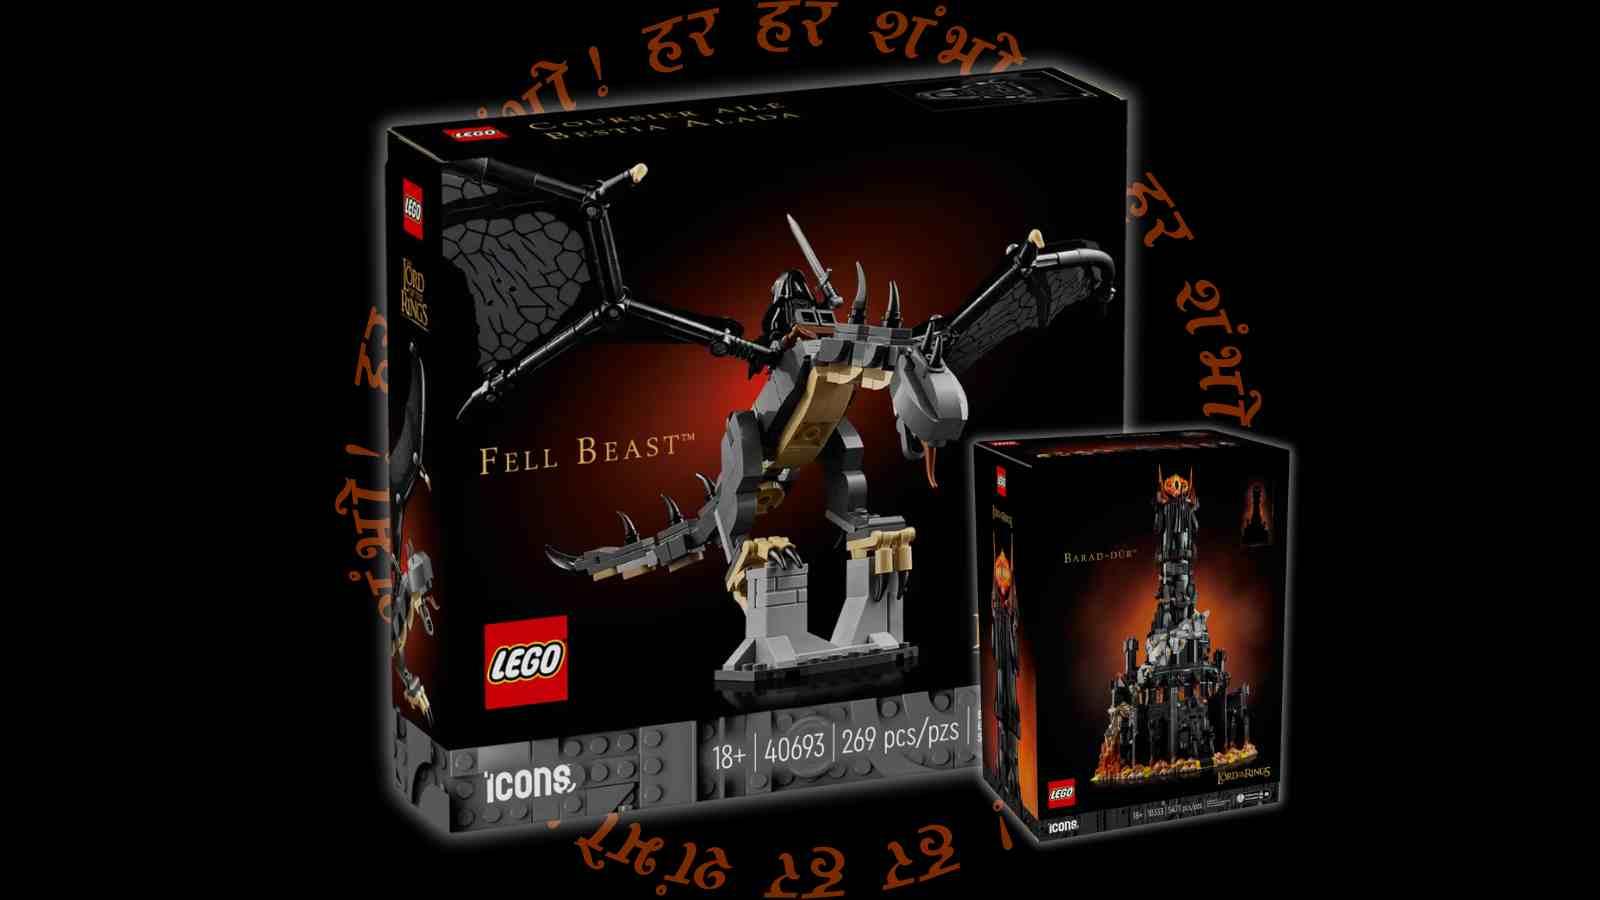 The LEGO Icons The Lord of the Rings: Fell Beast and Barad-Dur sets on a black background